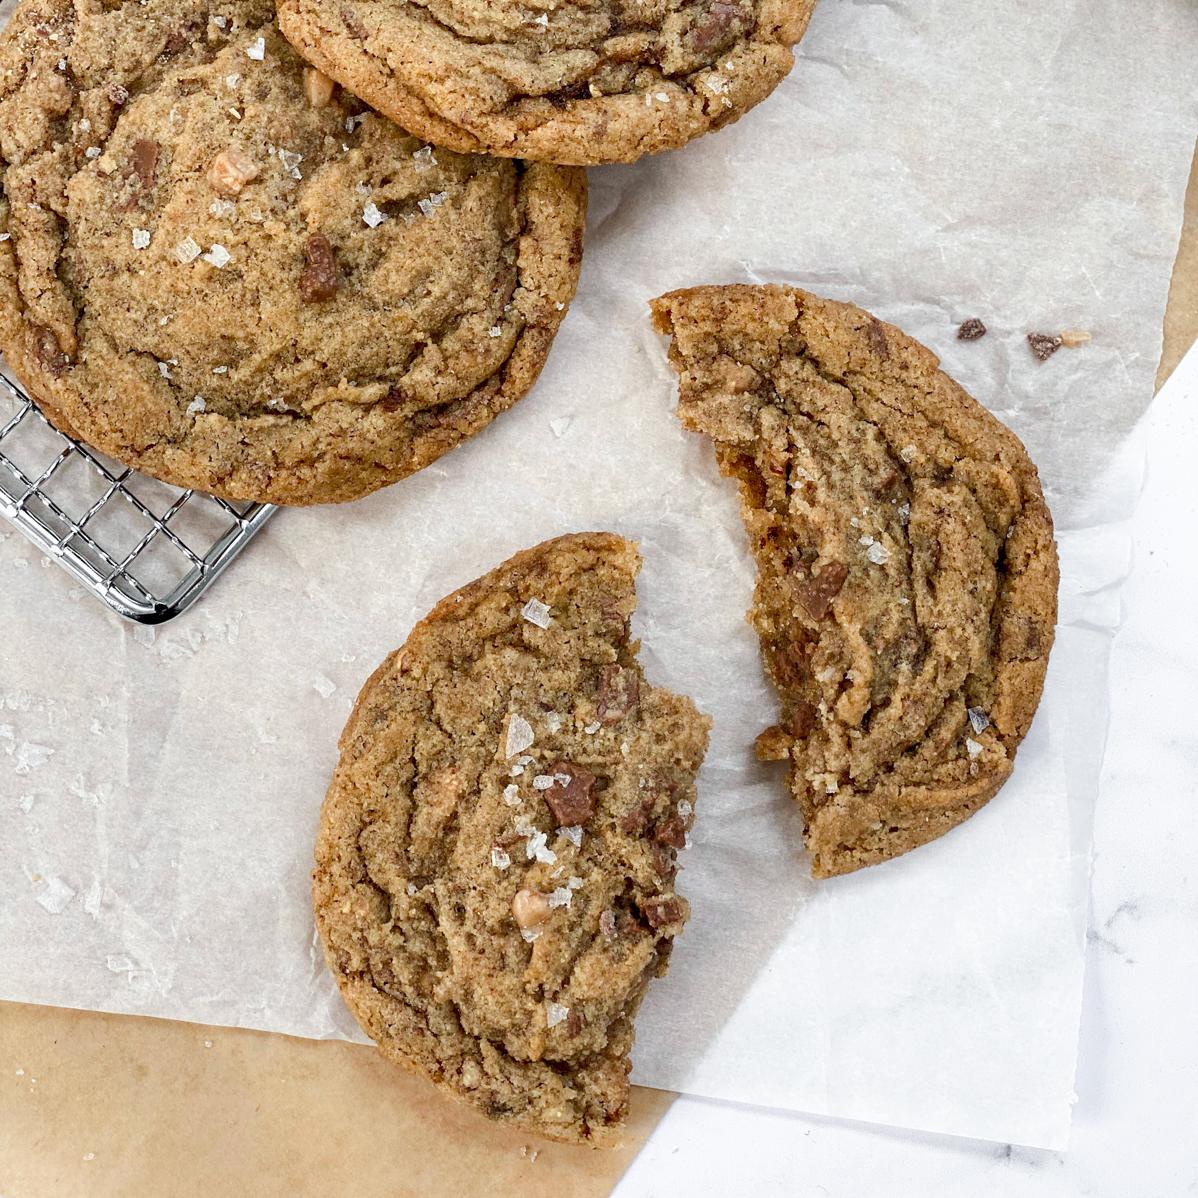  Who said cookies are only for kids? These chocolate coffee toffee cookies are perfect for any age.